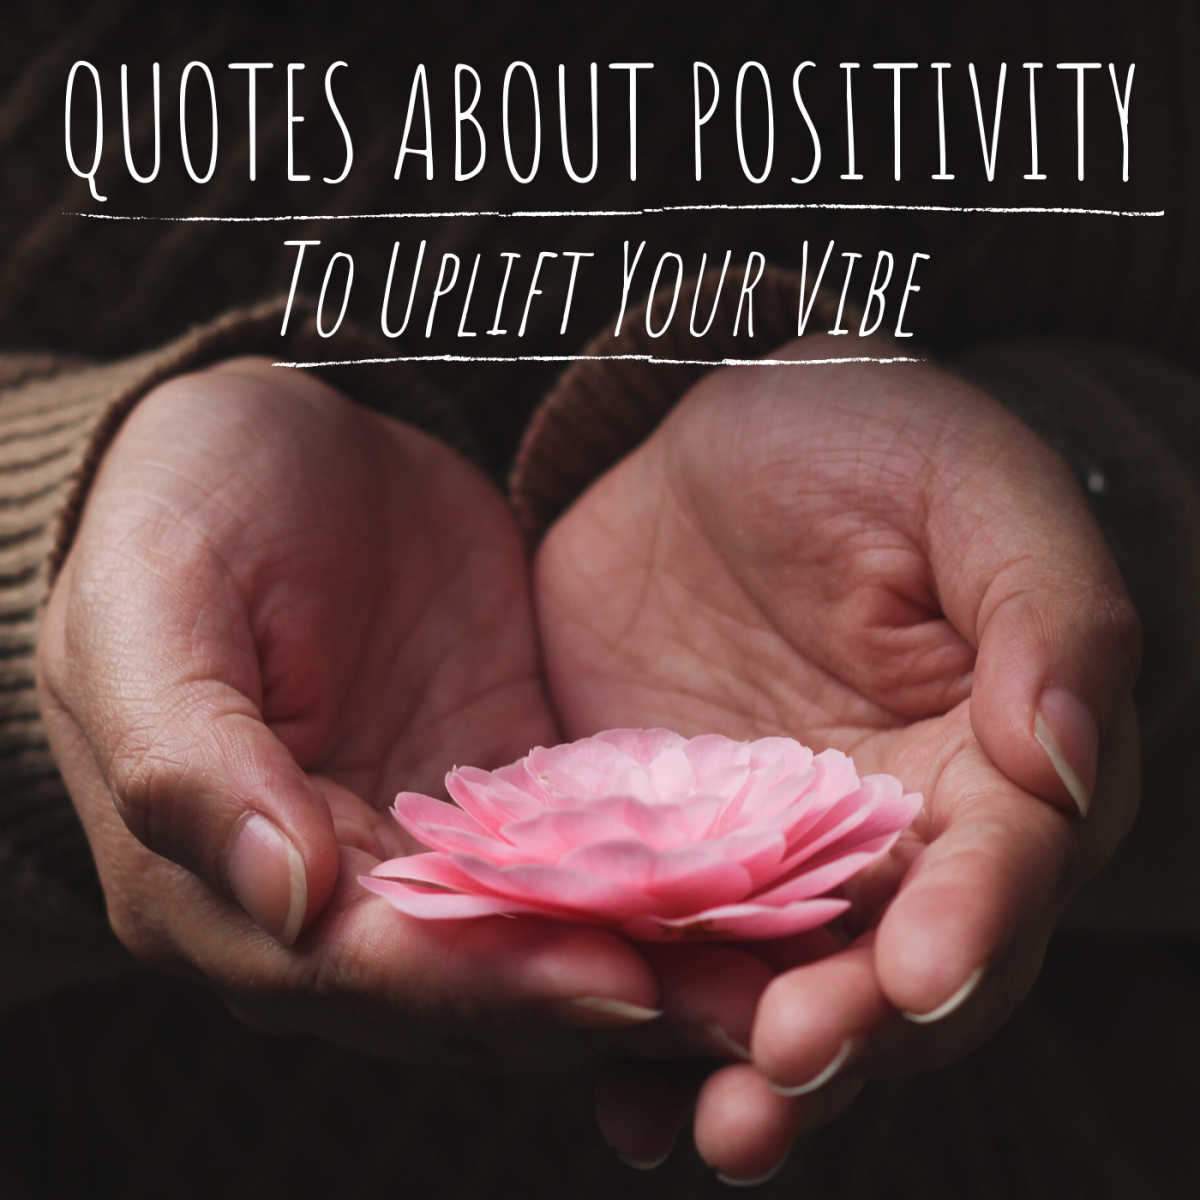 Quotations and Sayings About Good Vibes and Positivity